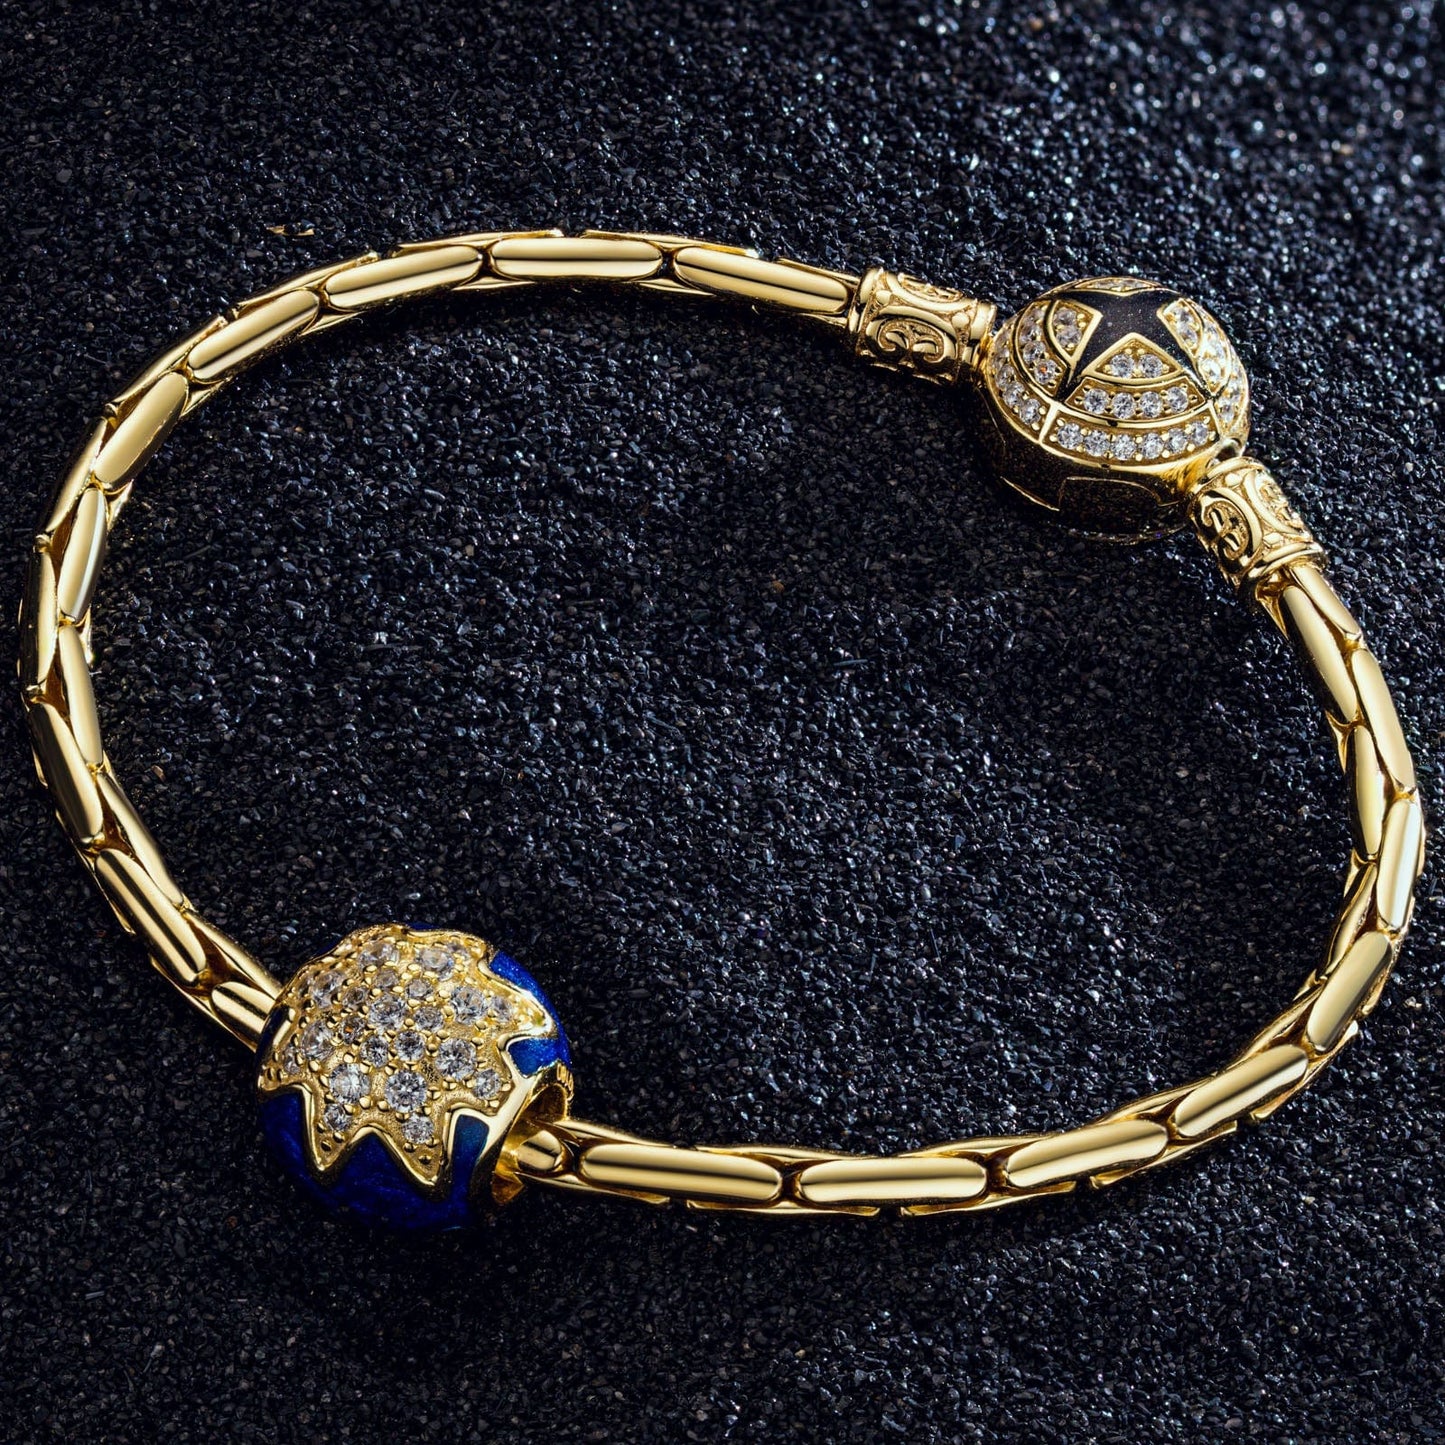 Blue Stars Shine Bright Tarnish-resistant Silver Charms With Enamel In 14K Gold Plated